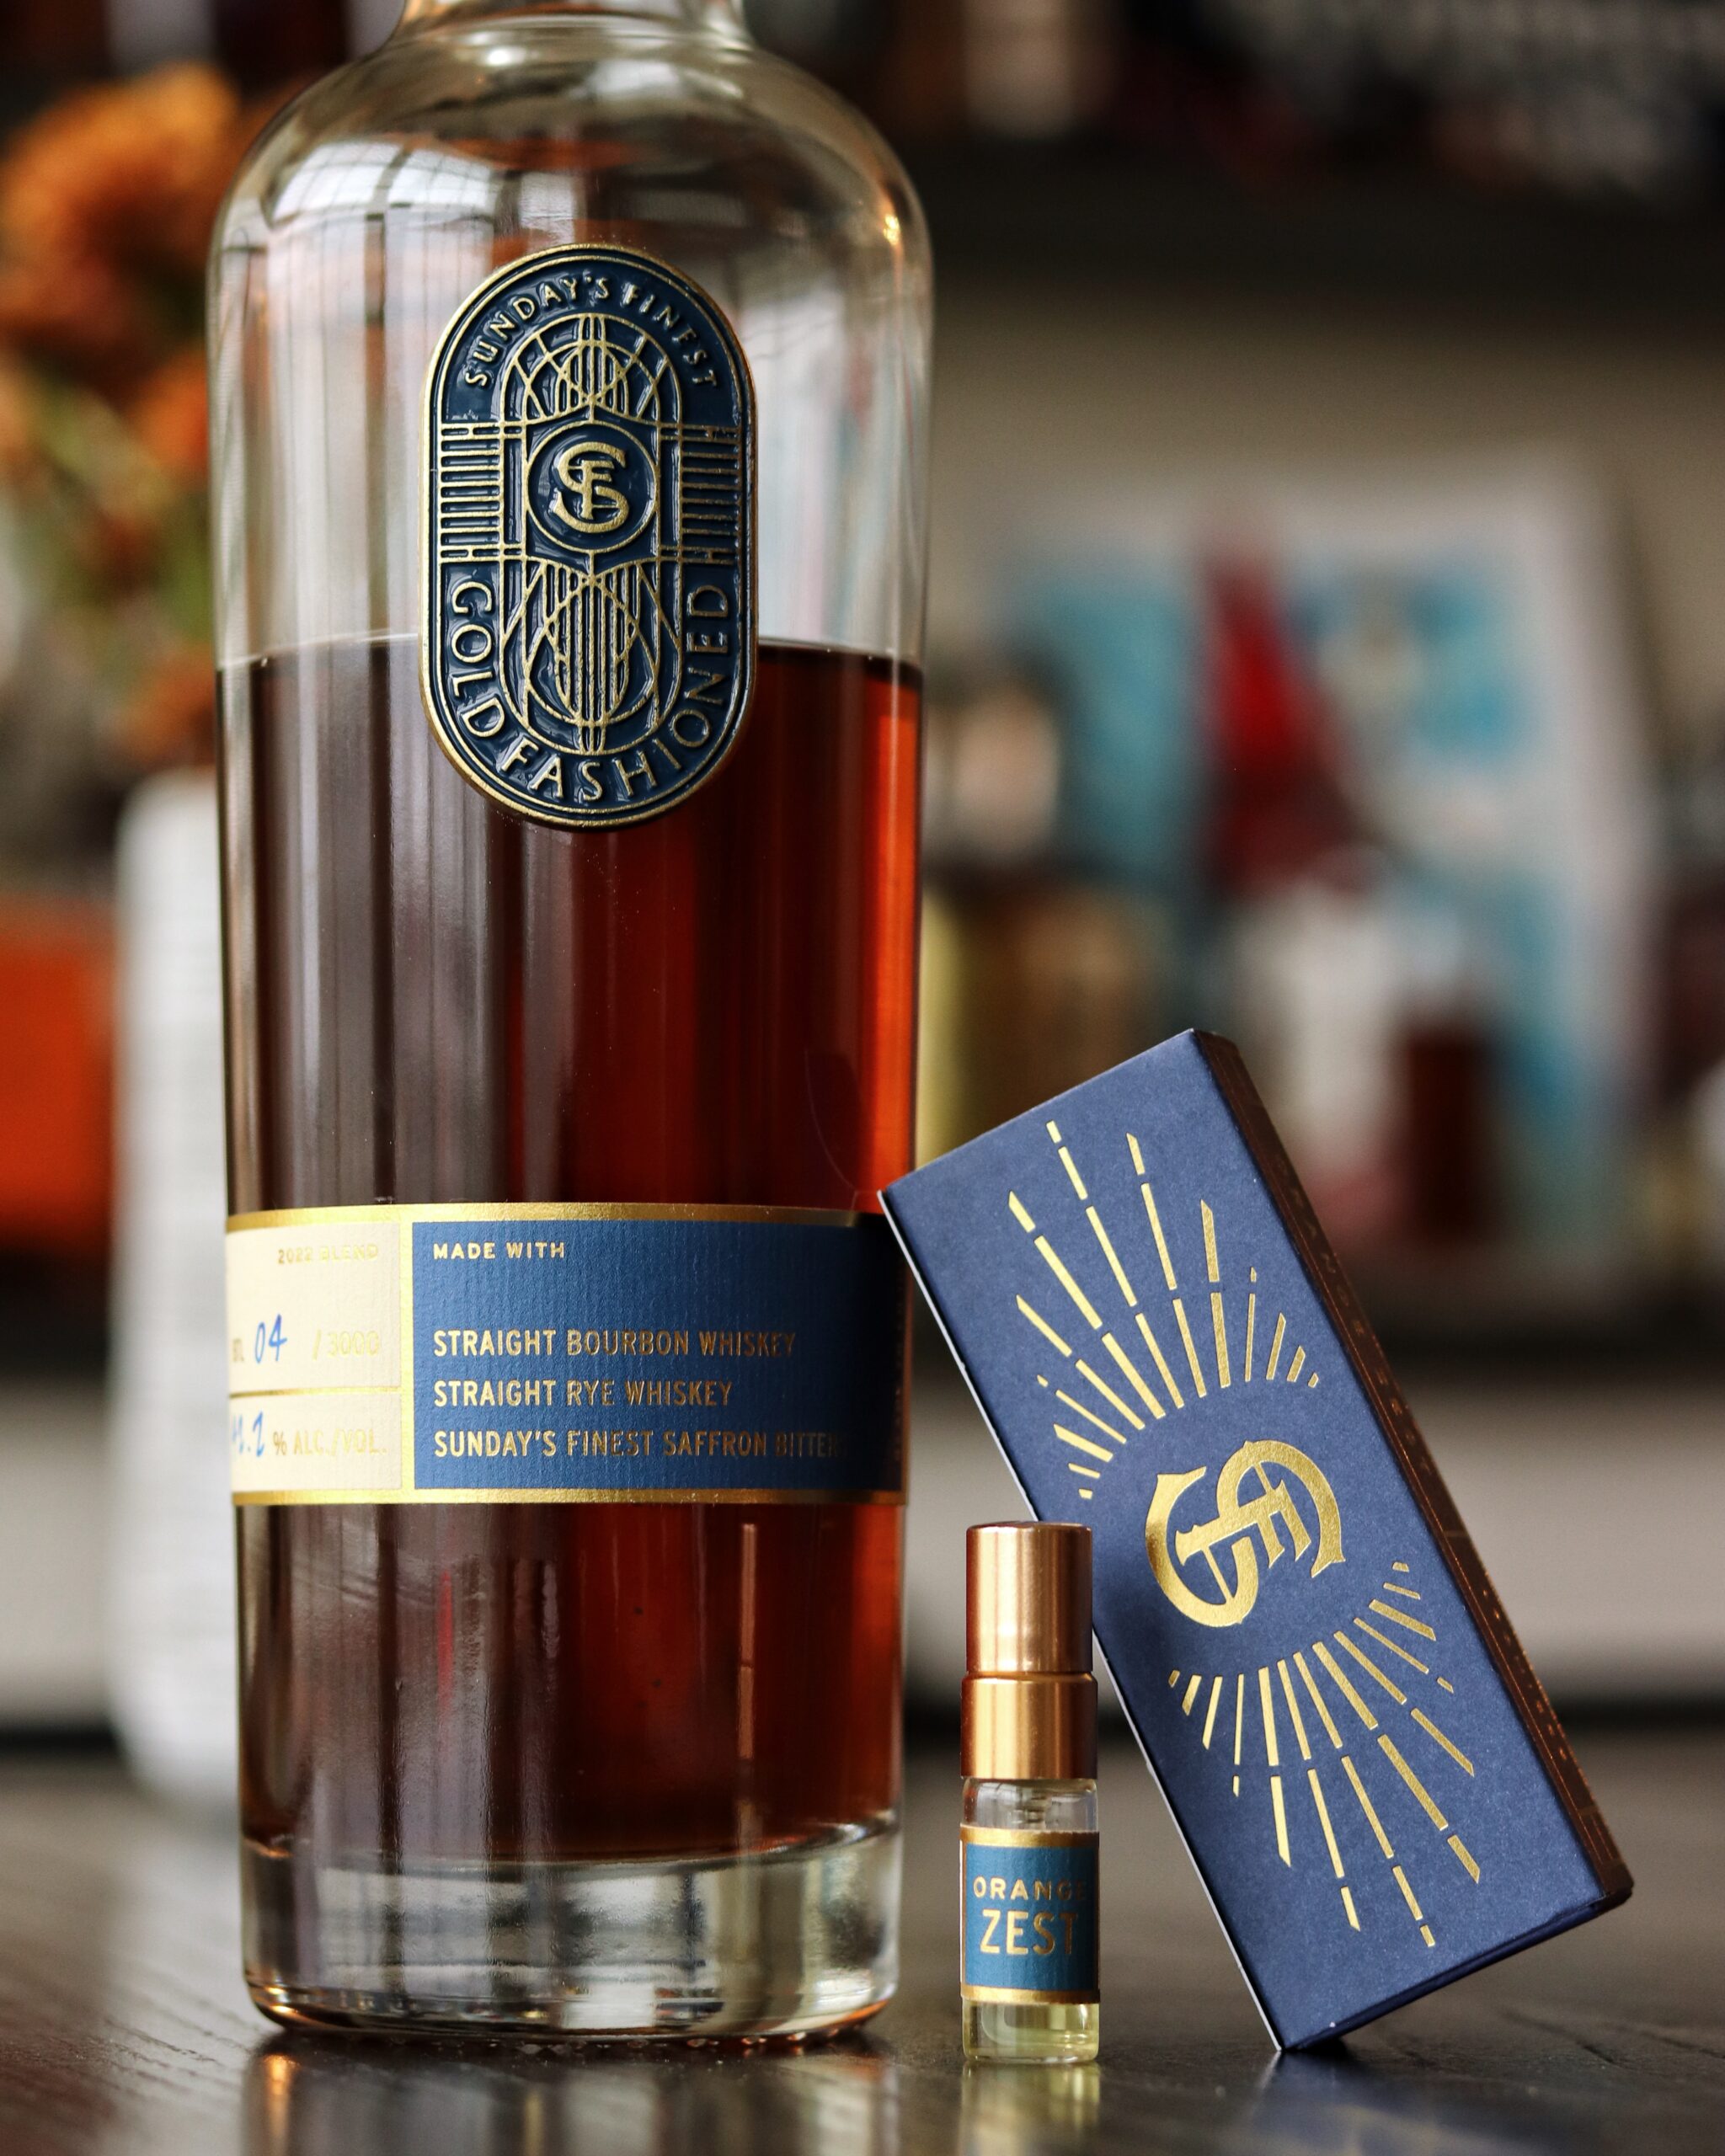 201: An Ultra Premium Bourbon Cocktail – The Gold Fashioned